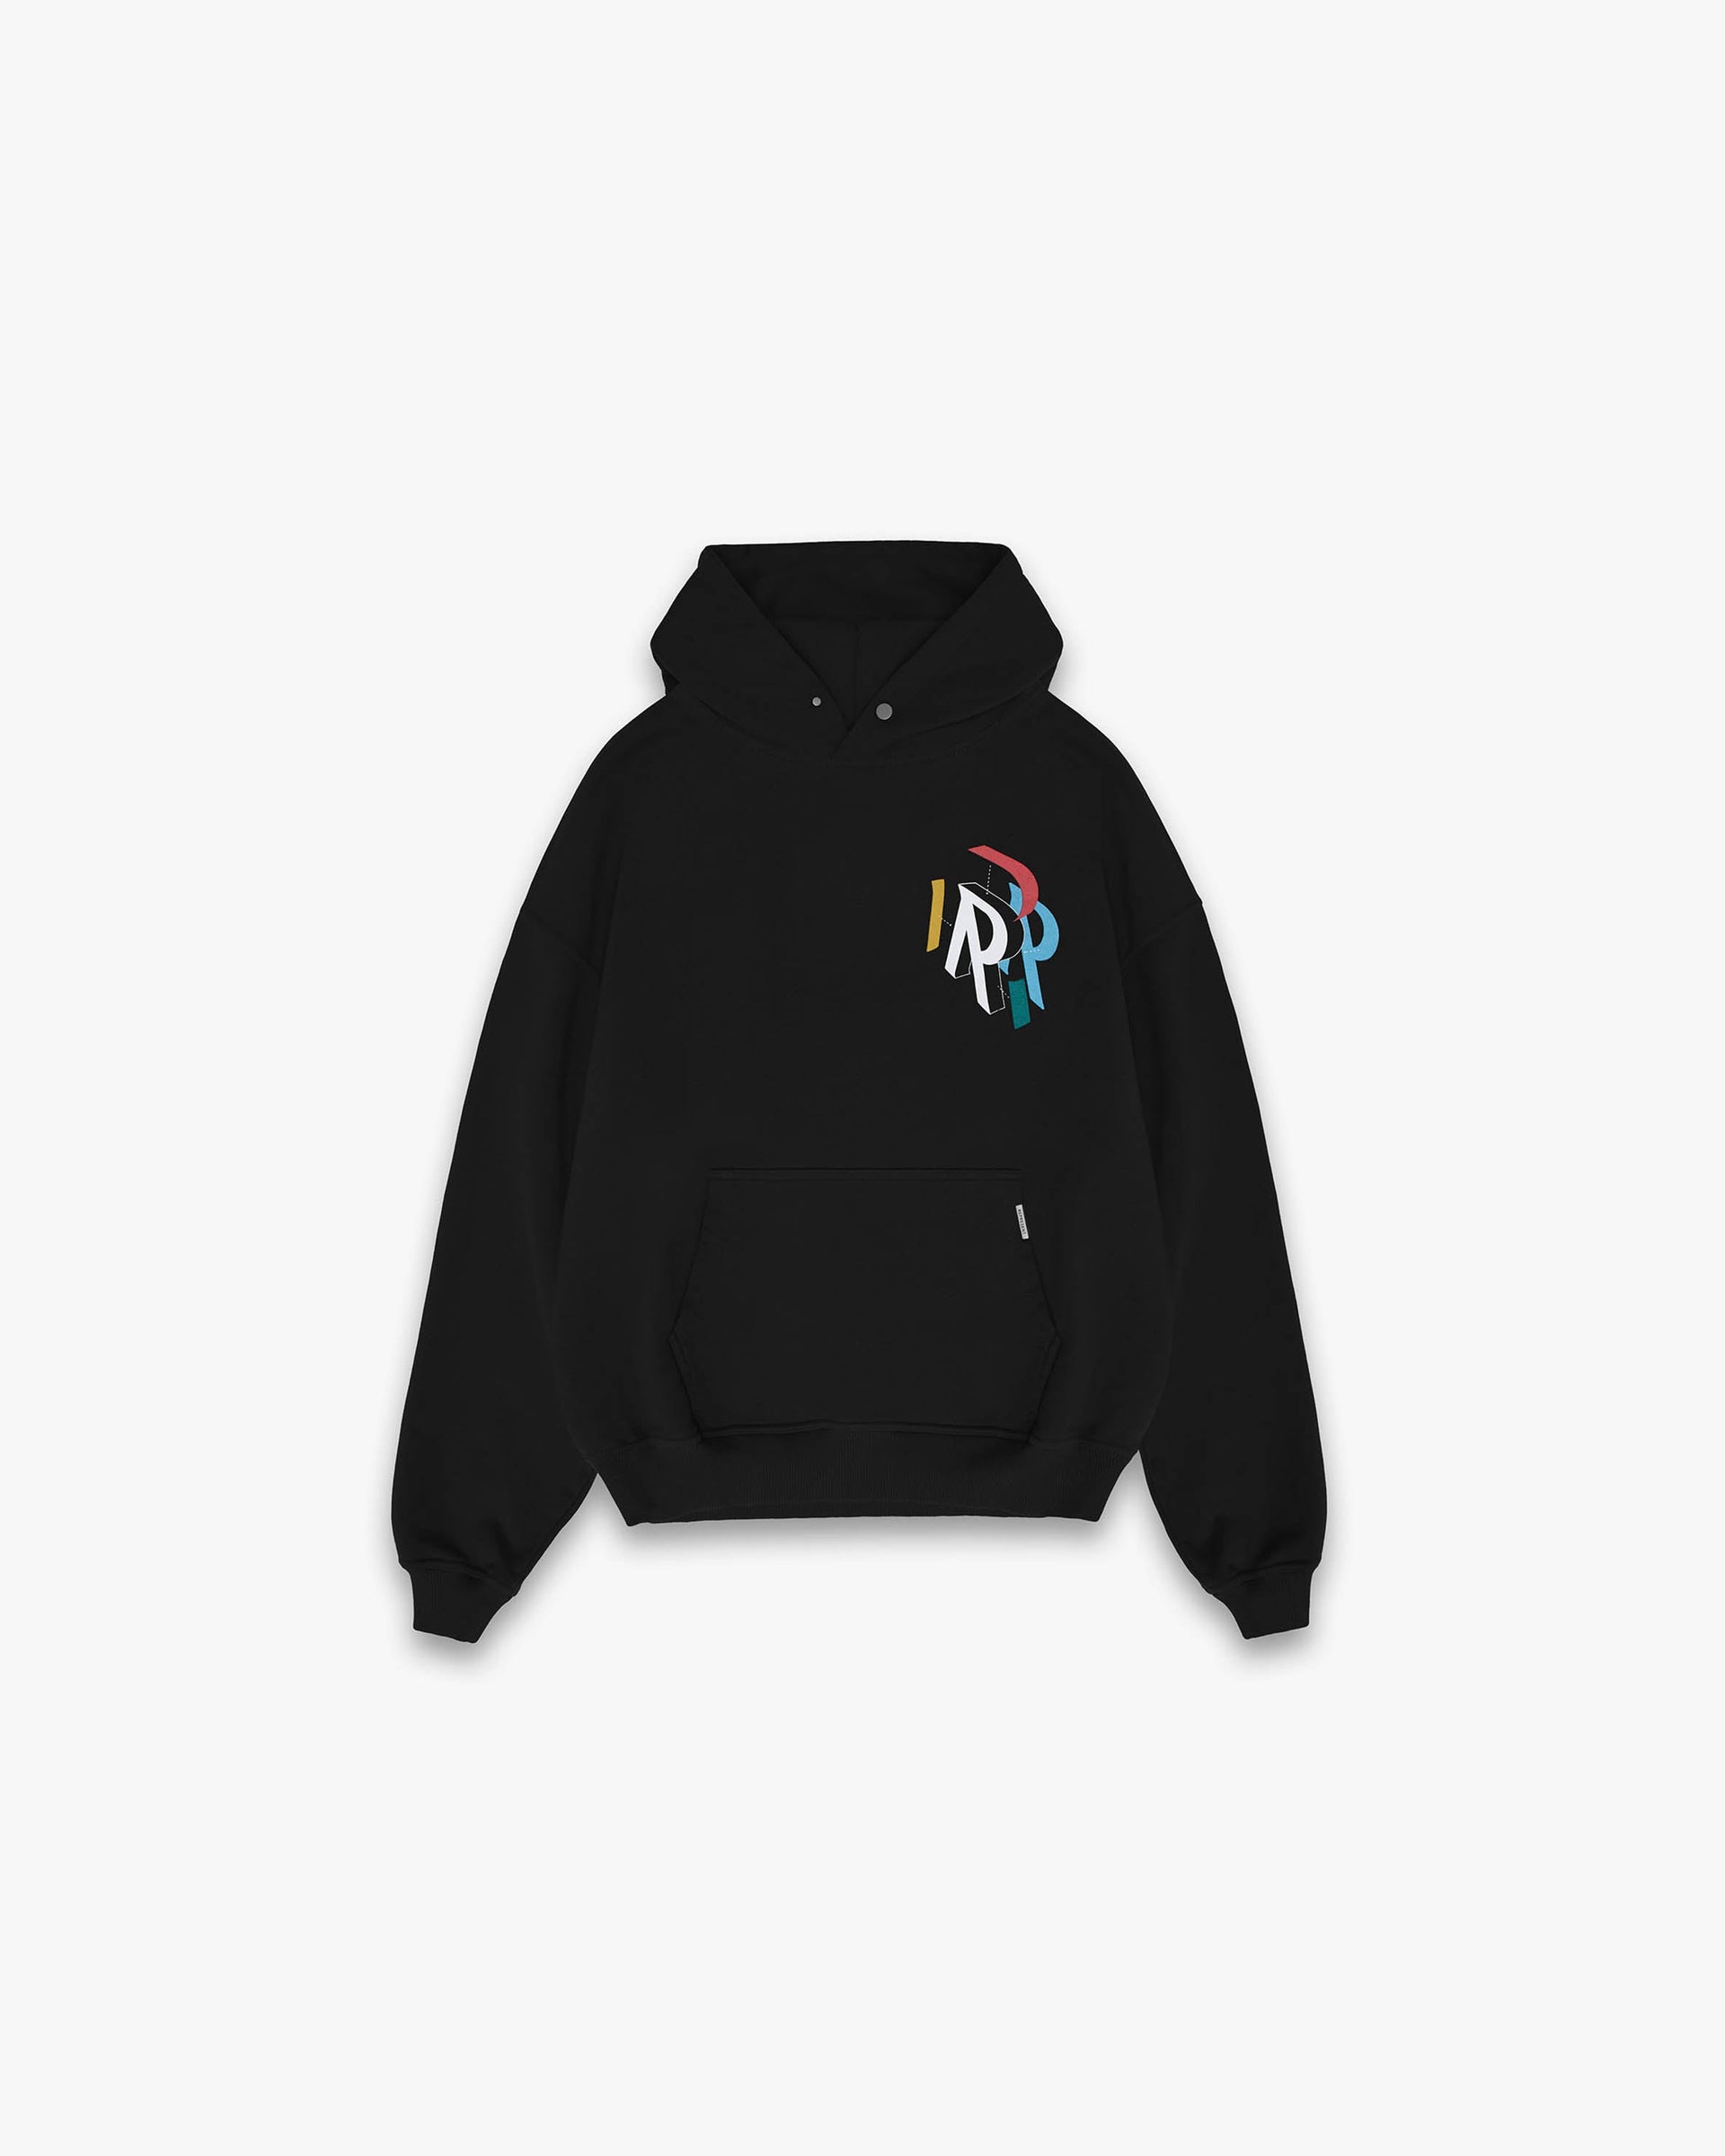 Initial Assembly Hoodie | Black Hoodies SS23 | Represent Clo